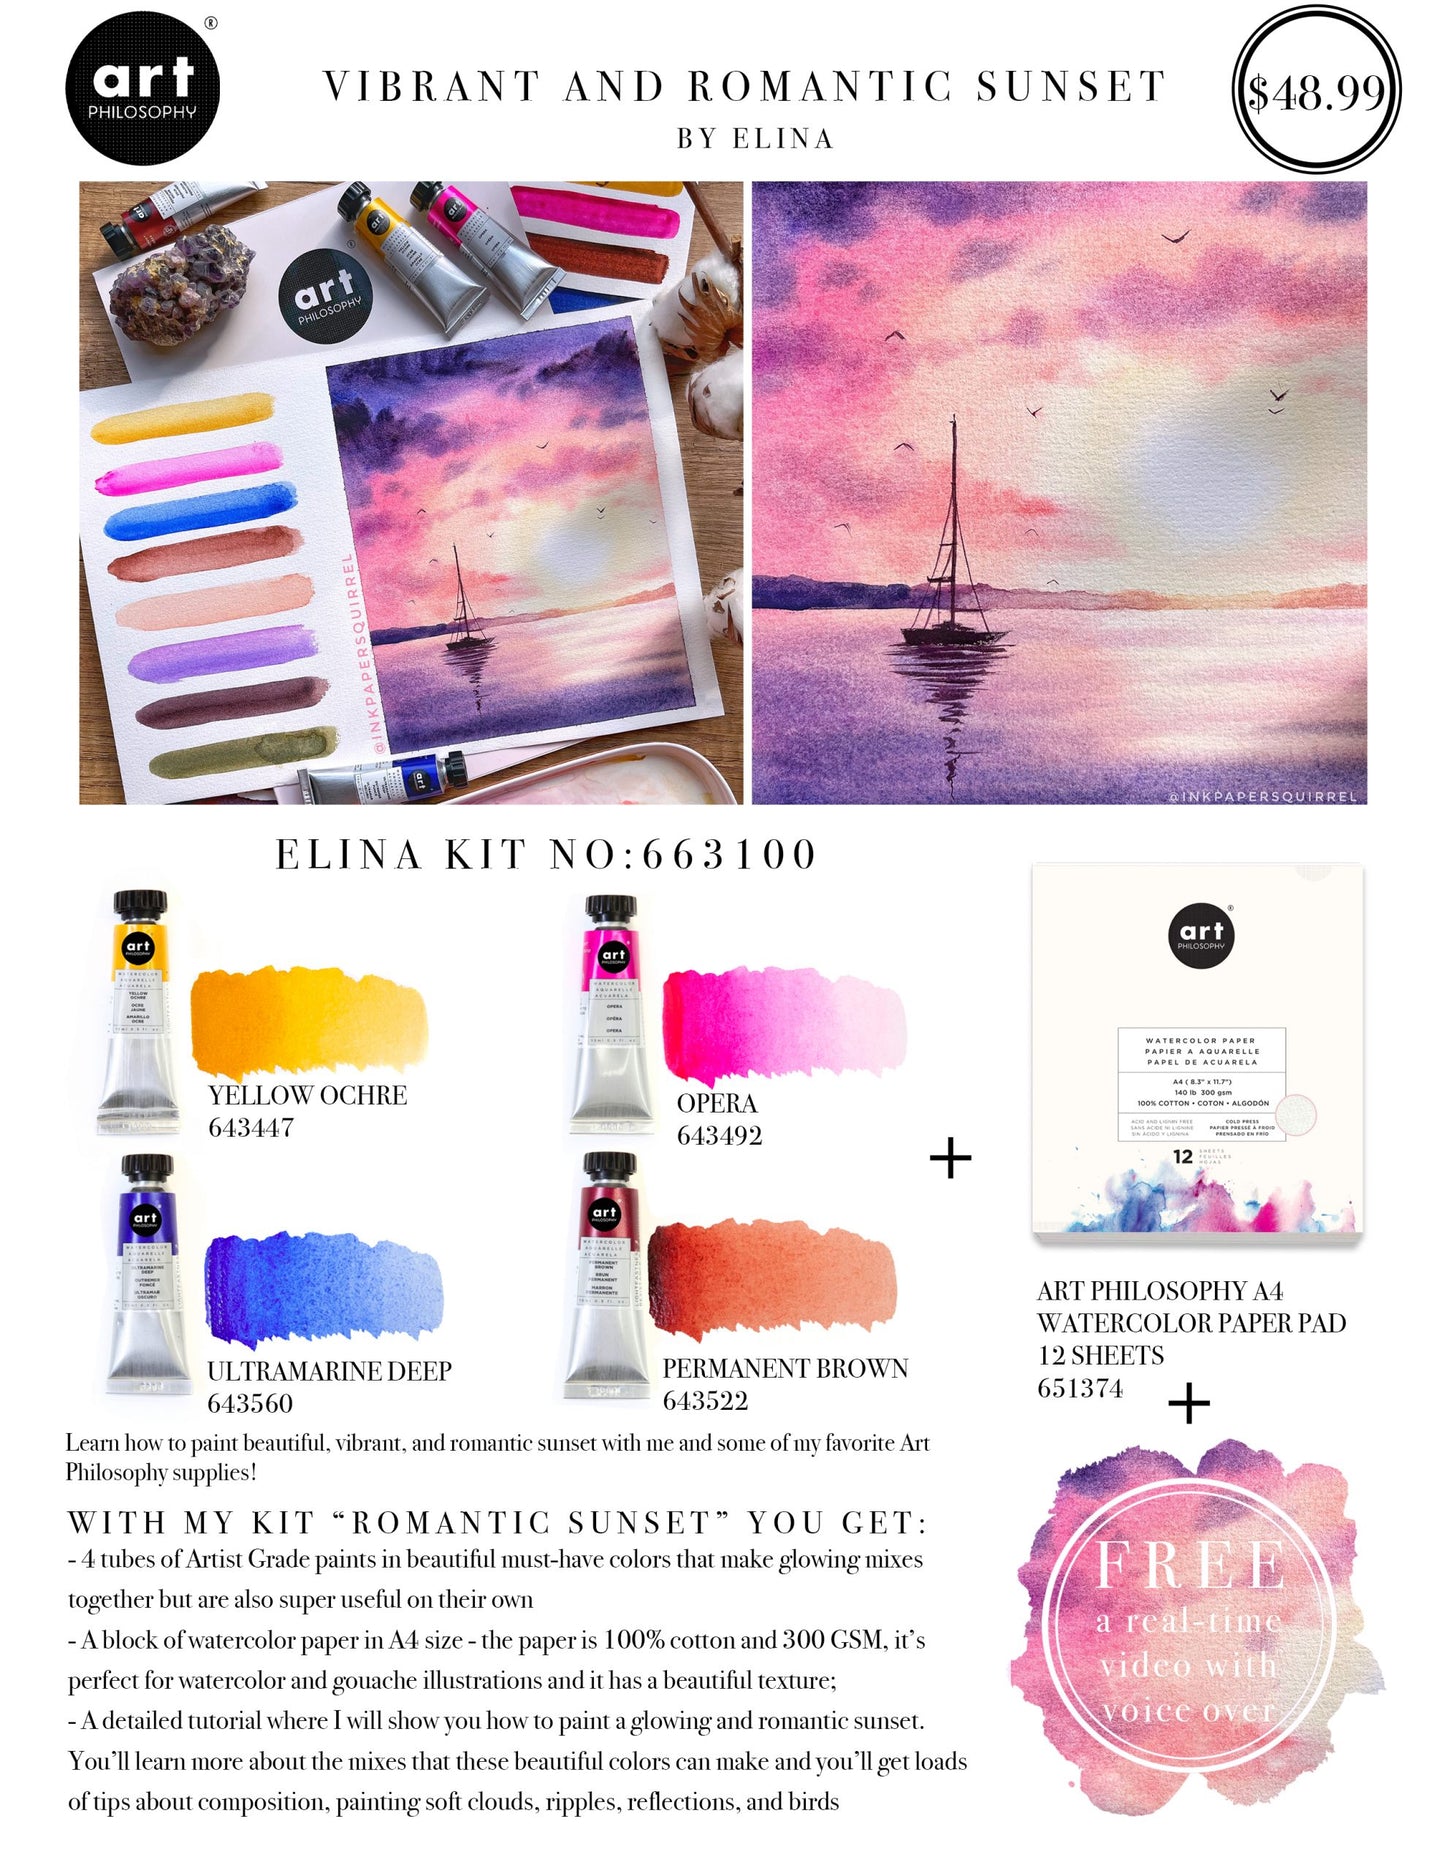 Vibrant and Romantic Sunset kit by Elina 650355663100